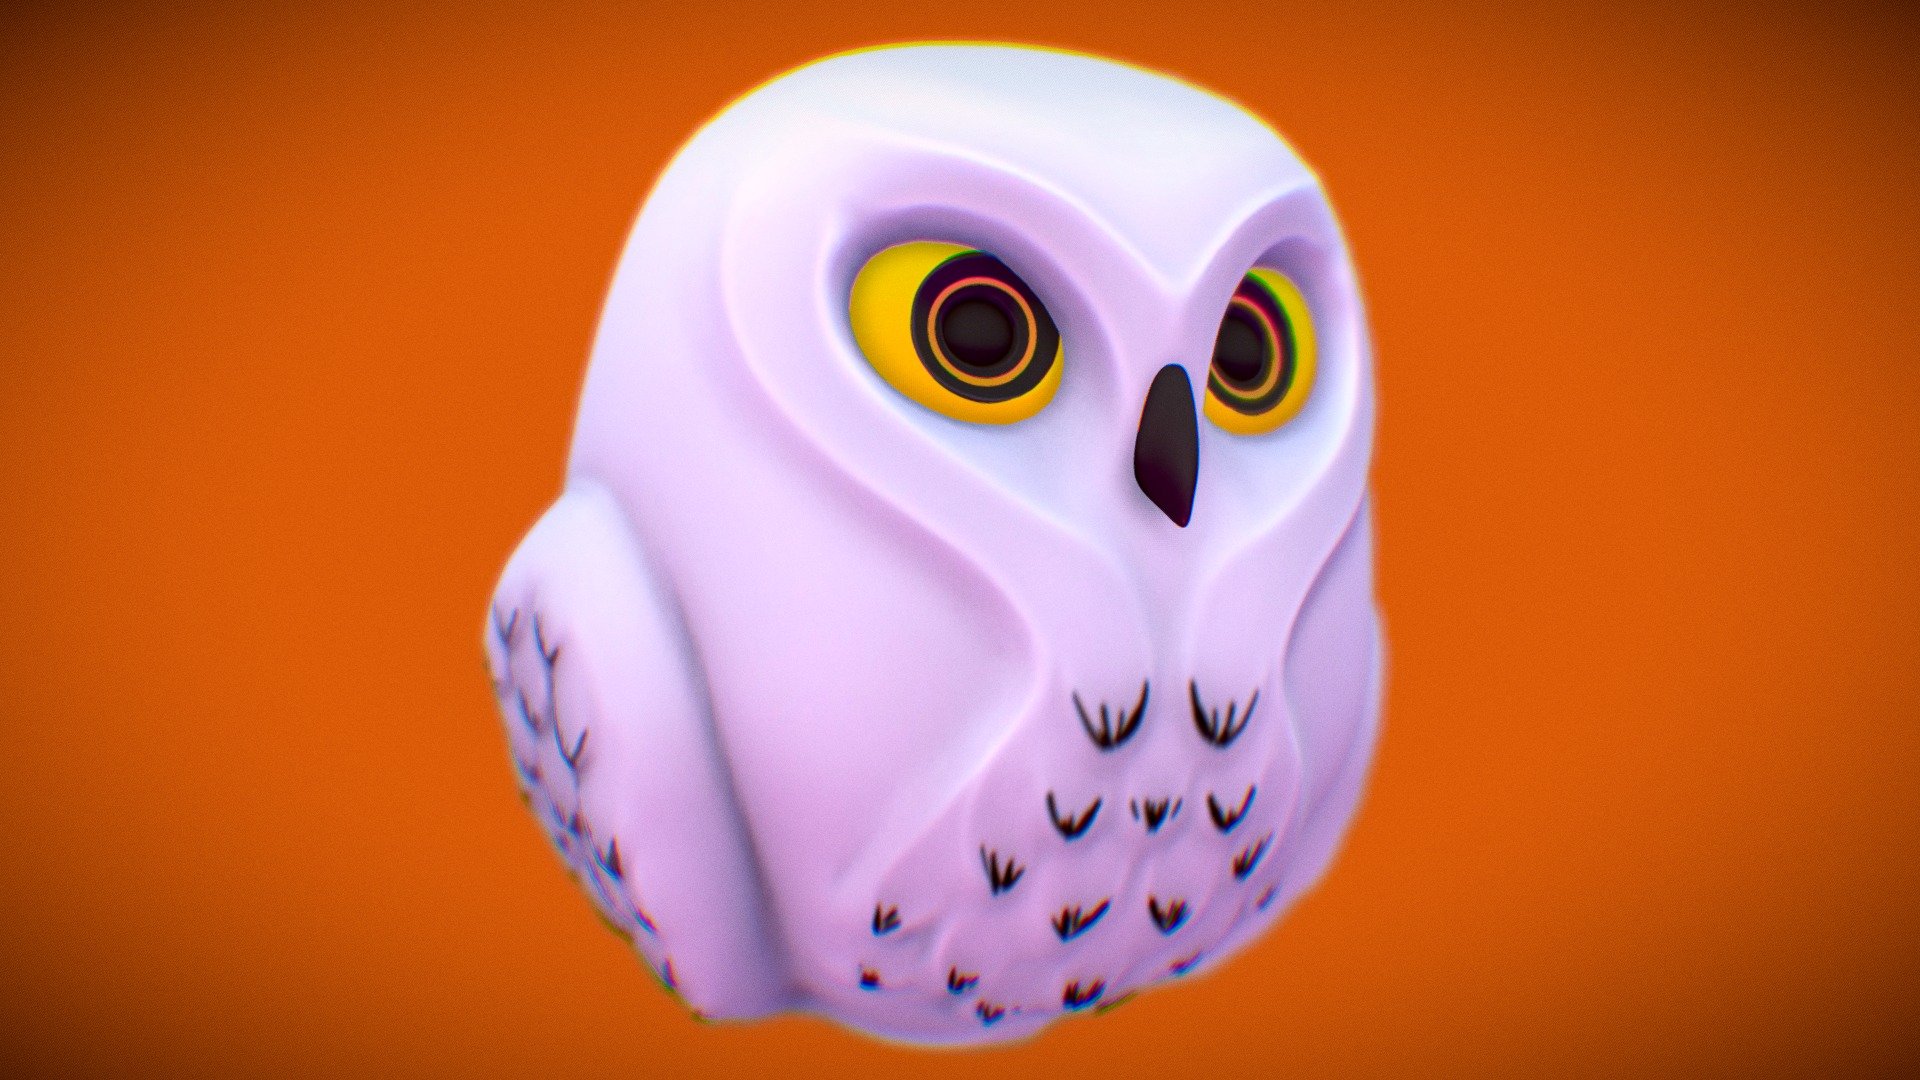 ****Art_Work for #3December challenge with the topic of “Snowy Owl”

Made in Zbrush and texturized in Substance Painter with bakelighting 3d model